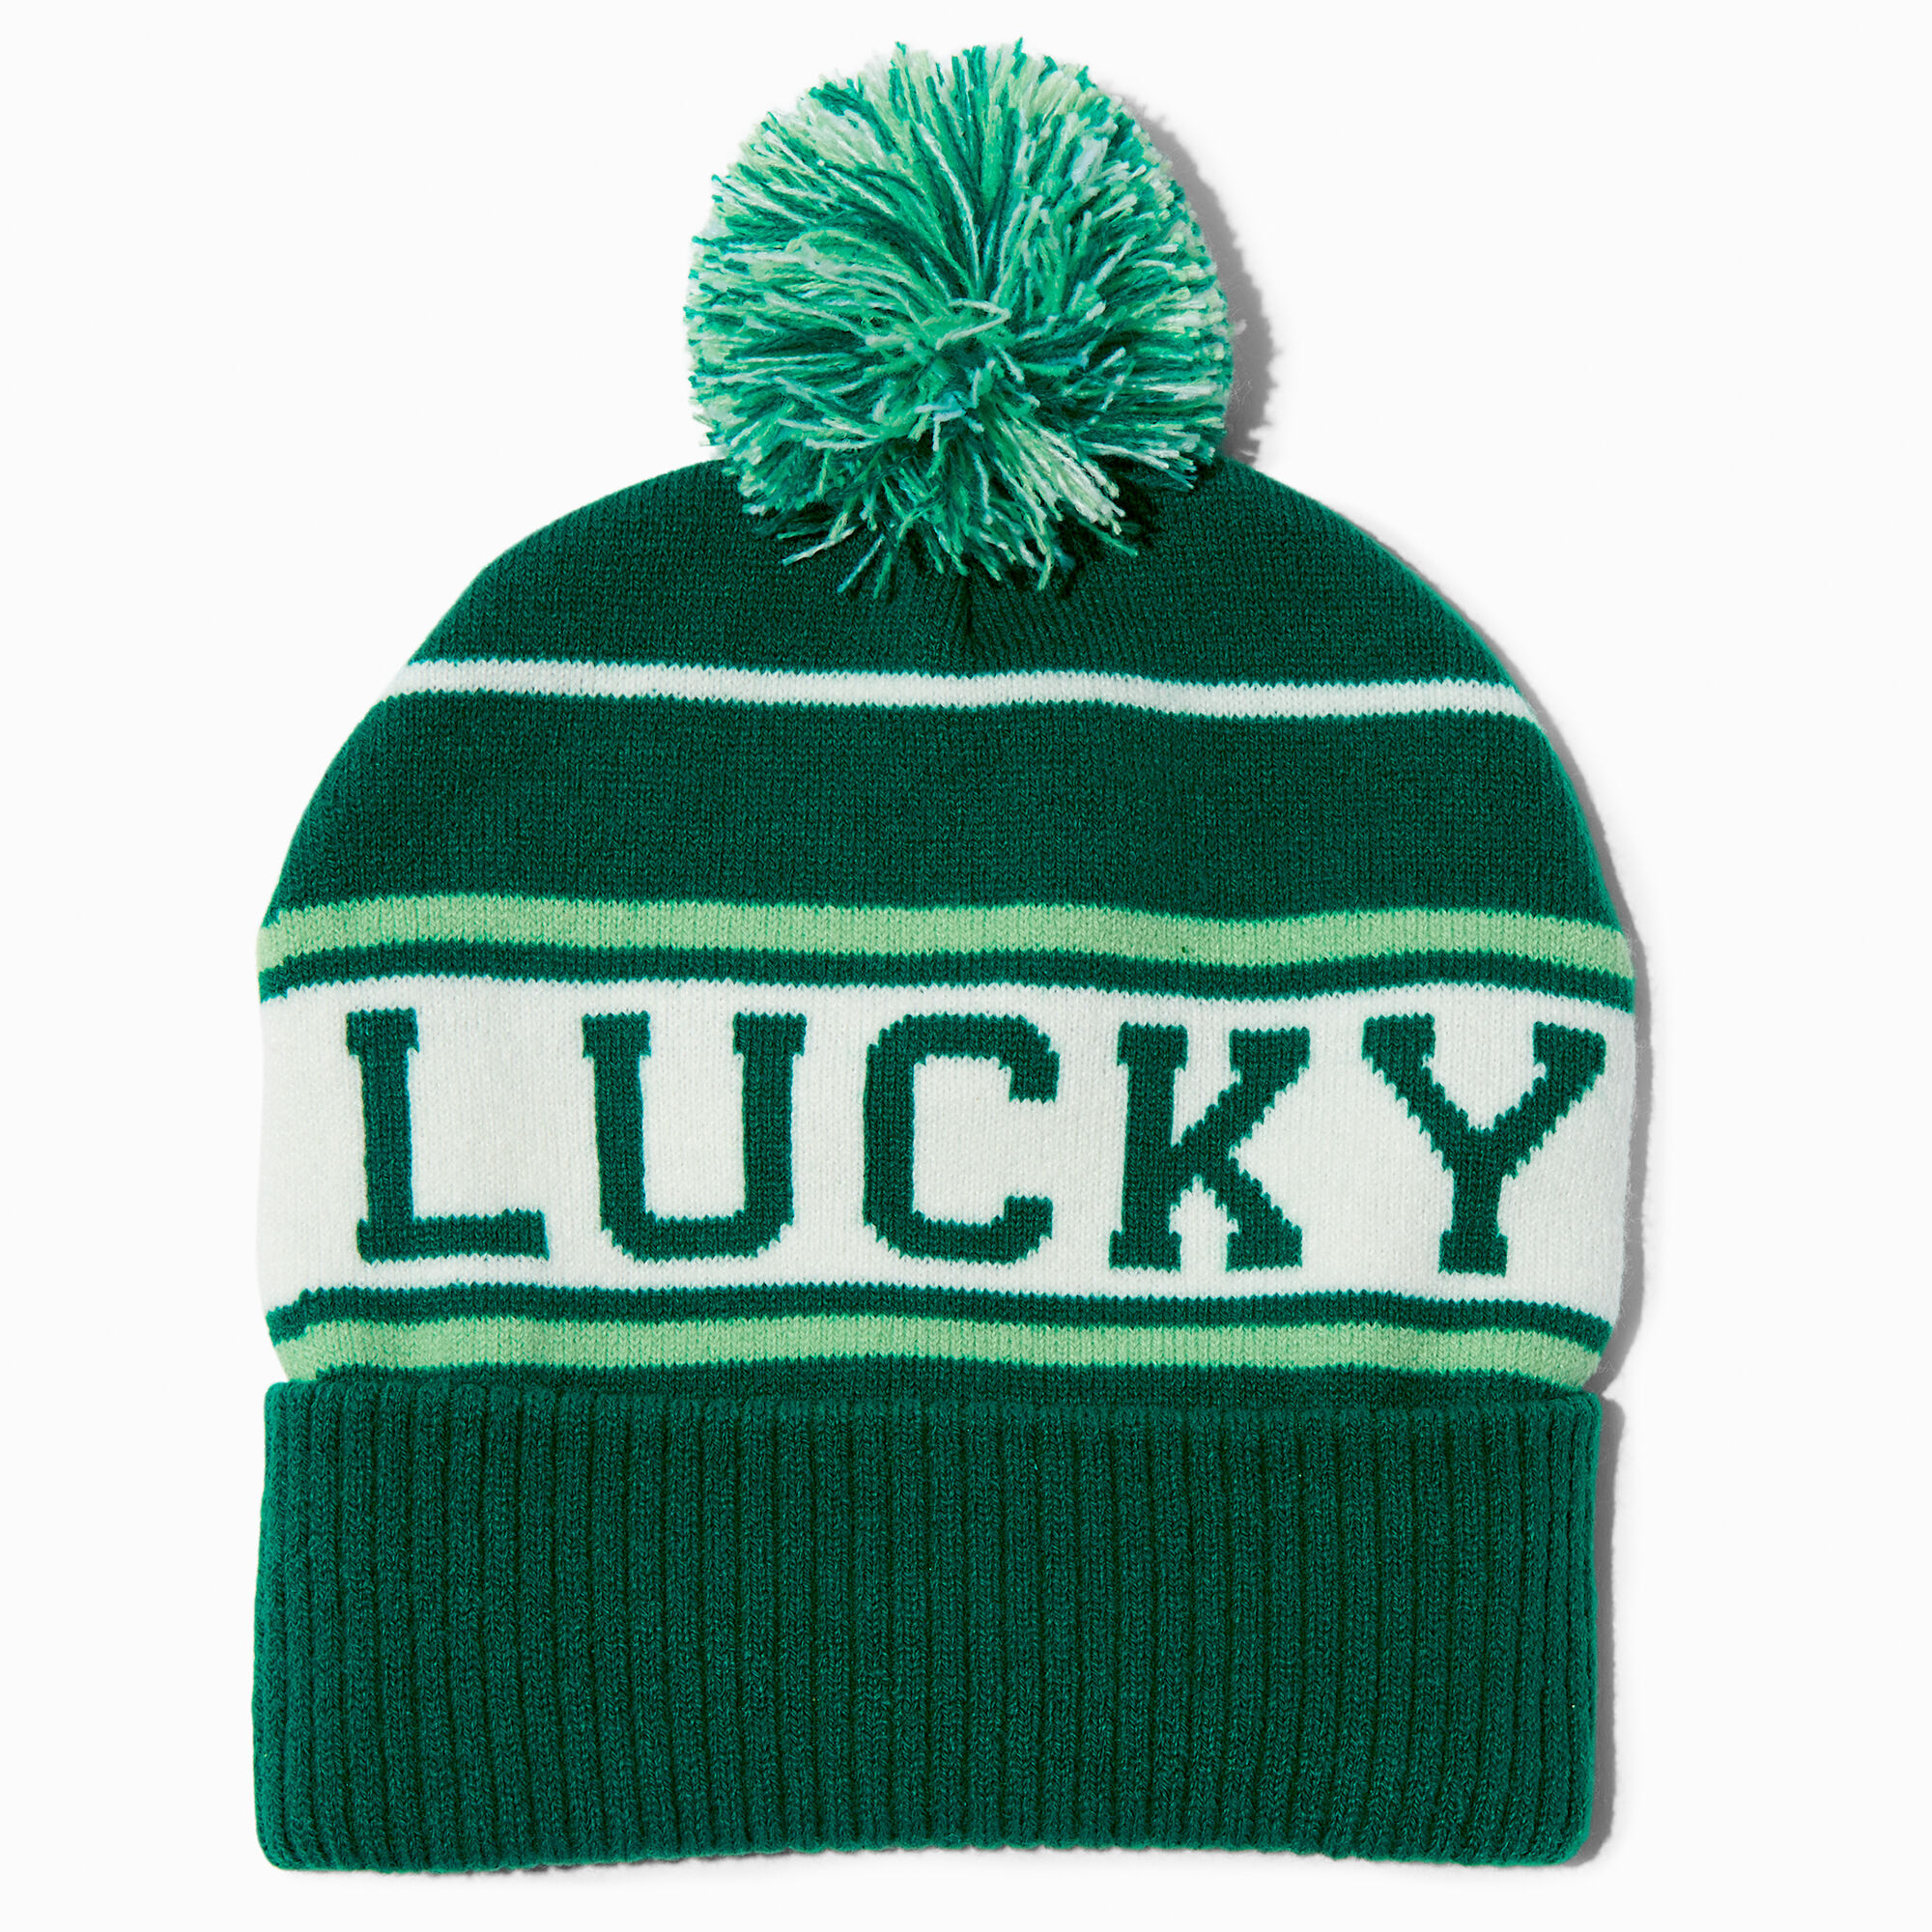 View Claires lucky Striped Beanie Hat Green information